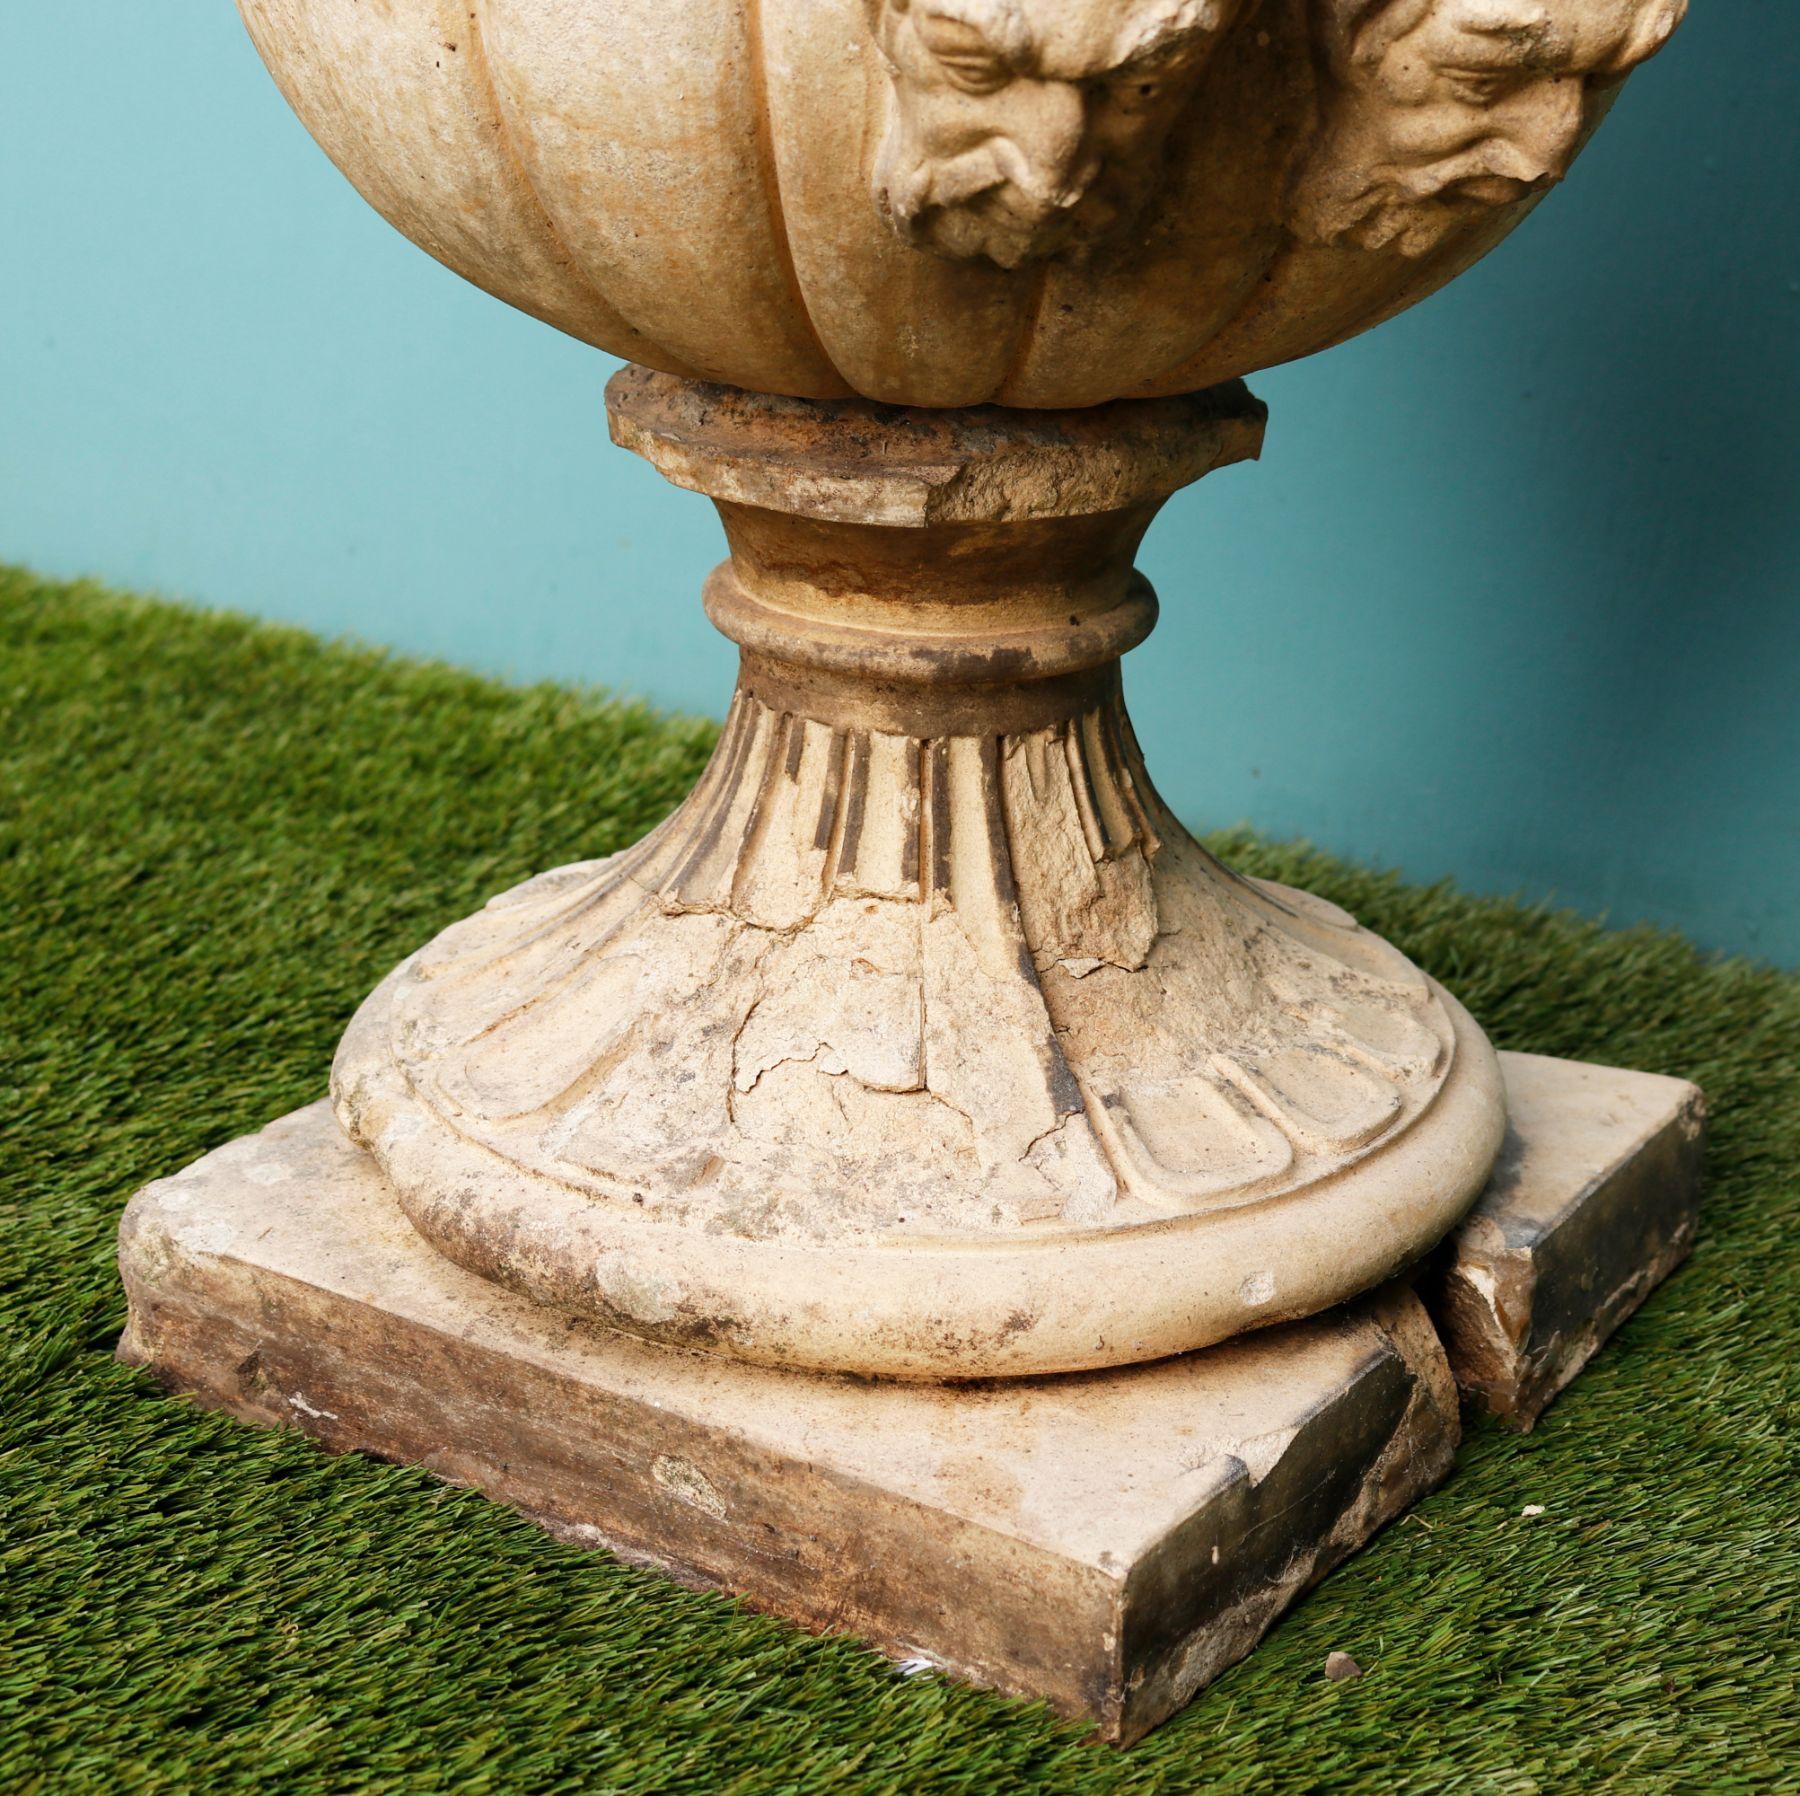 Two late 19th century antique buff terracotta garden urns manufactured by Blanchard. These urns are over 130 years old and despite signs of wear and losses, remain a striking set for a garden, telling the story of 19th century English craftsmanship.